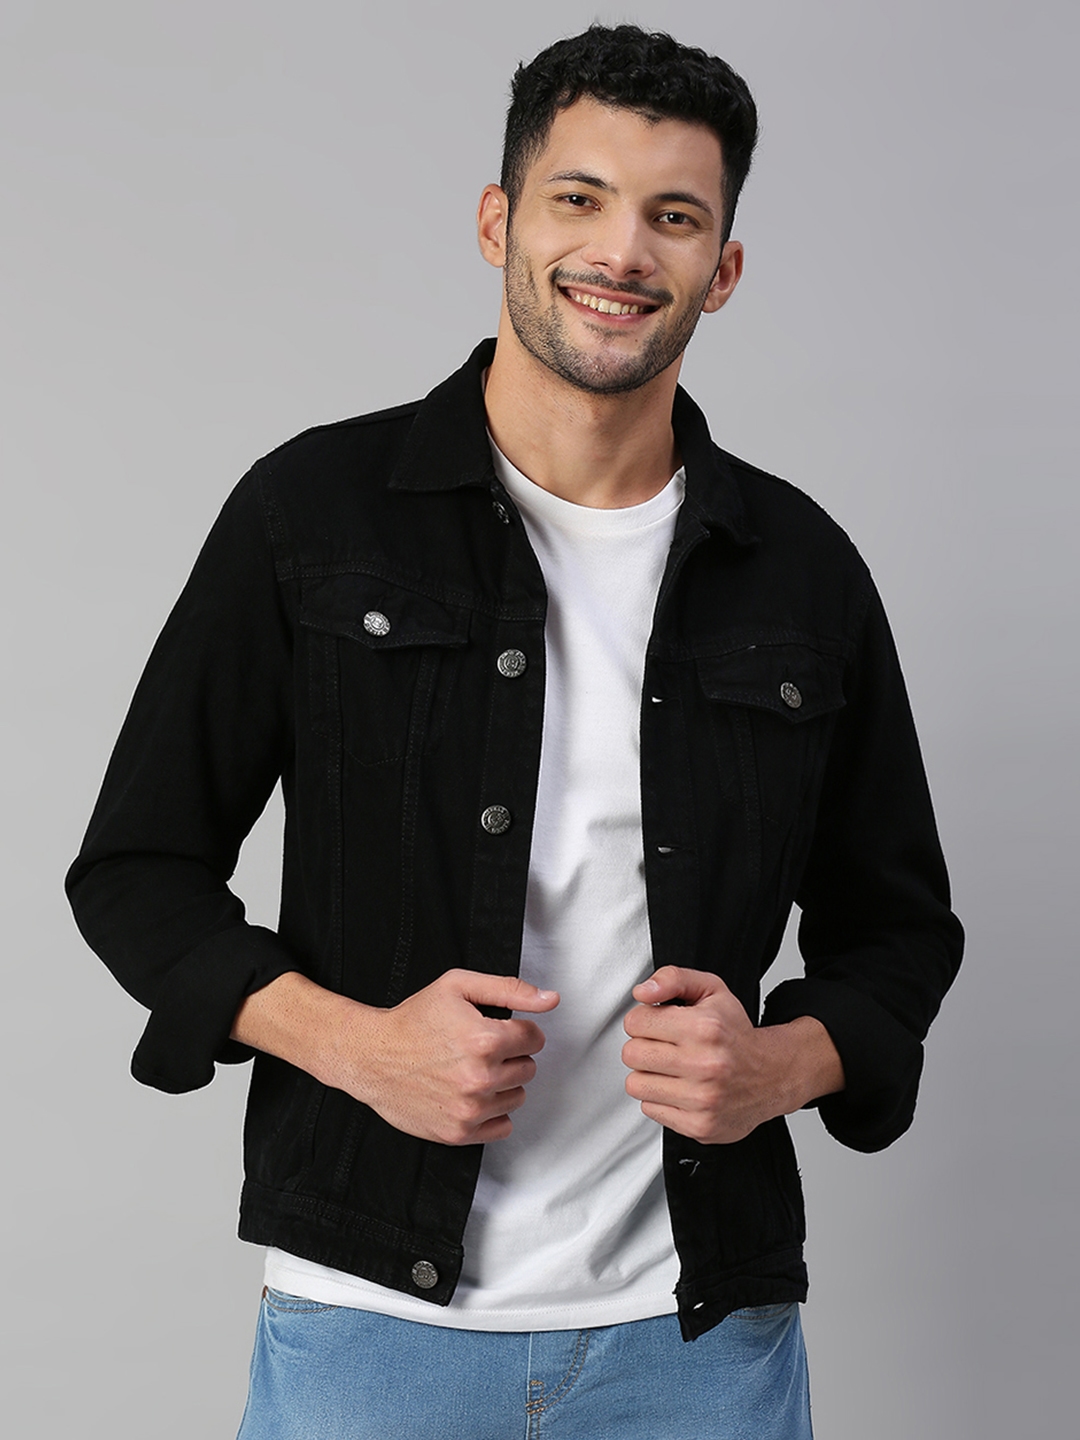 Reveal more than 137 black jeans jacket